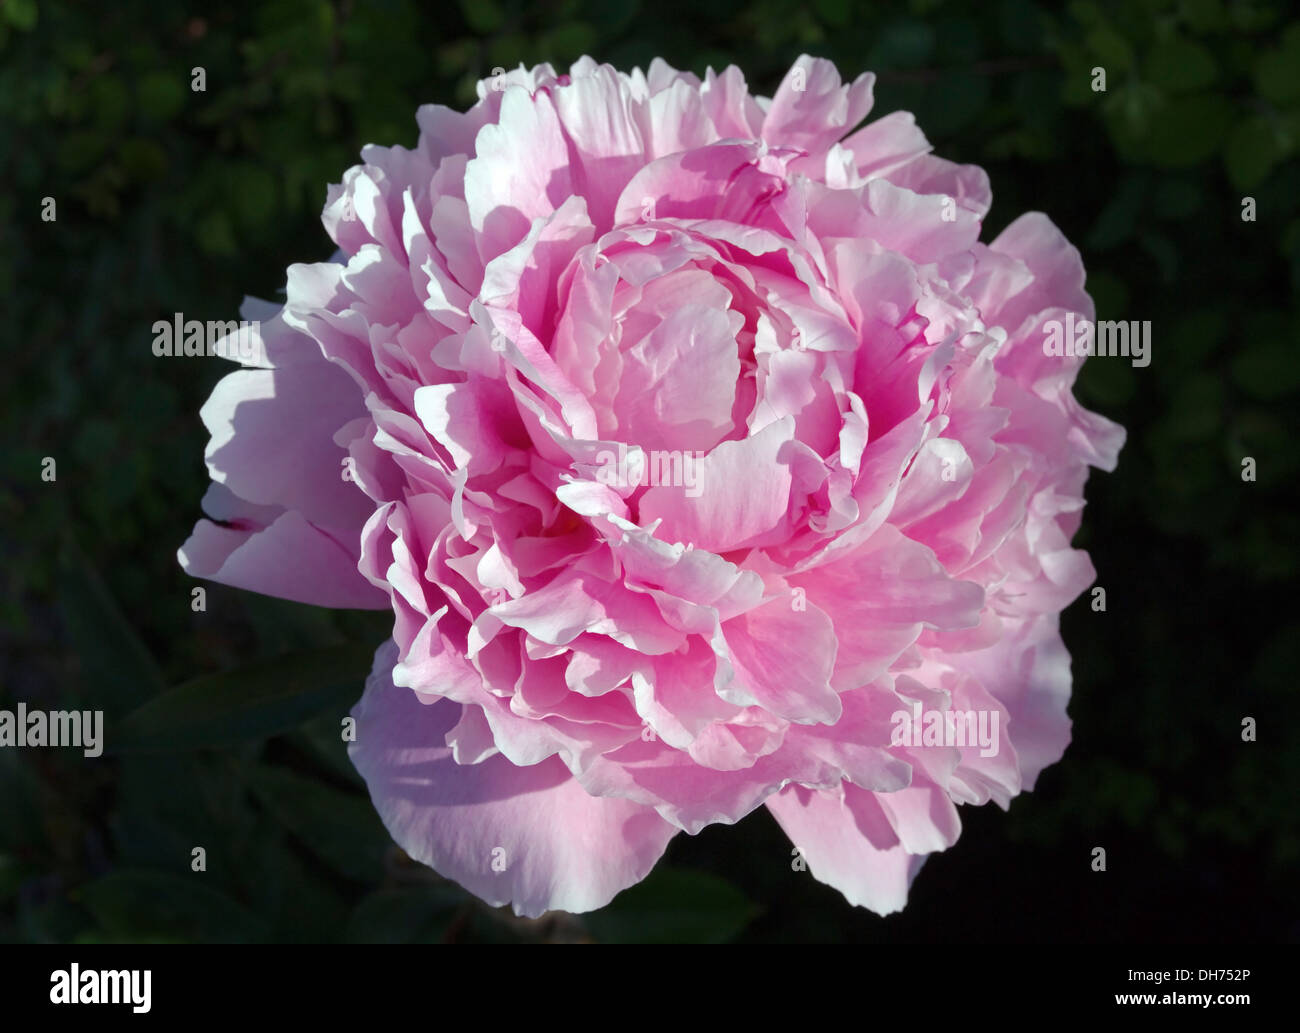 Close up of pink peony in flower against a dark background, early morning sunlight, English garden Stock Photo